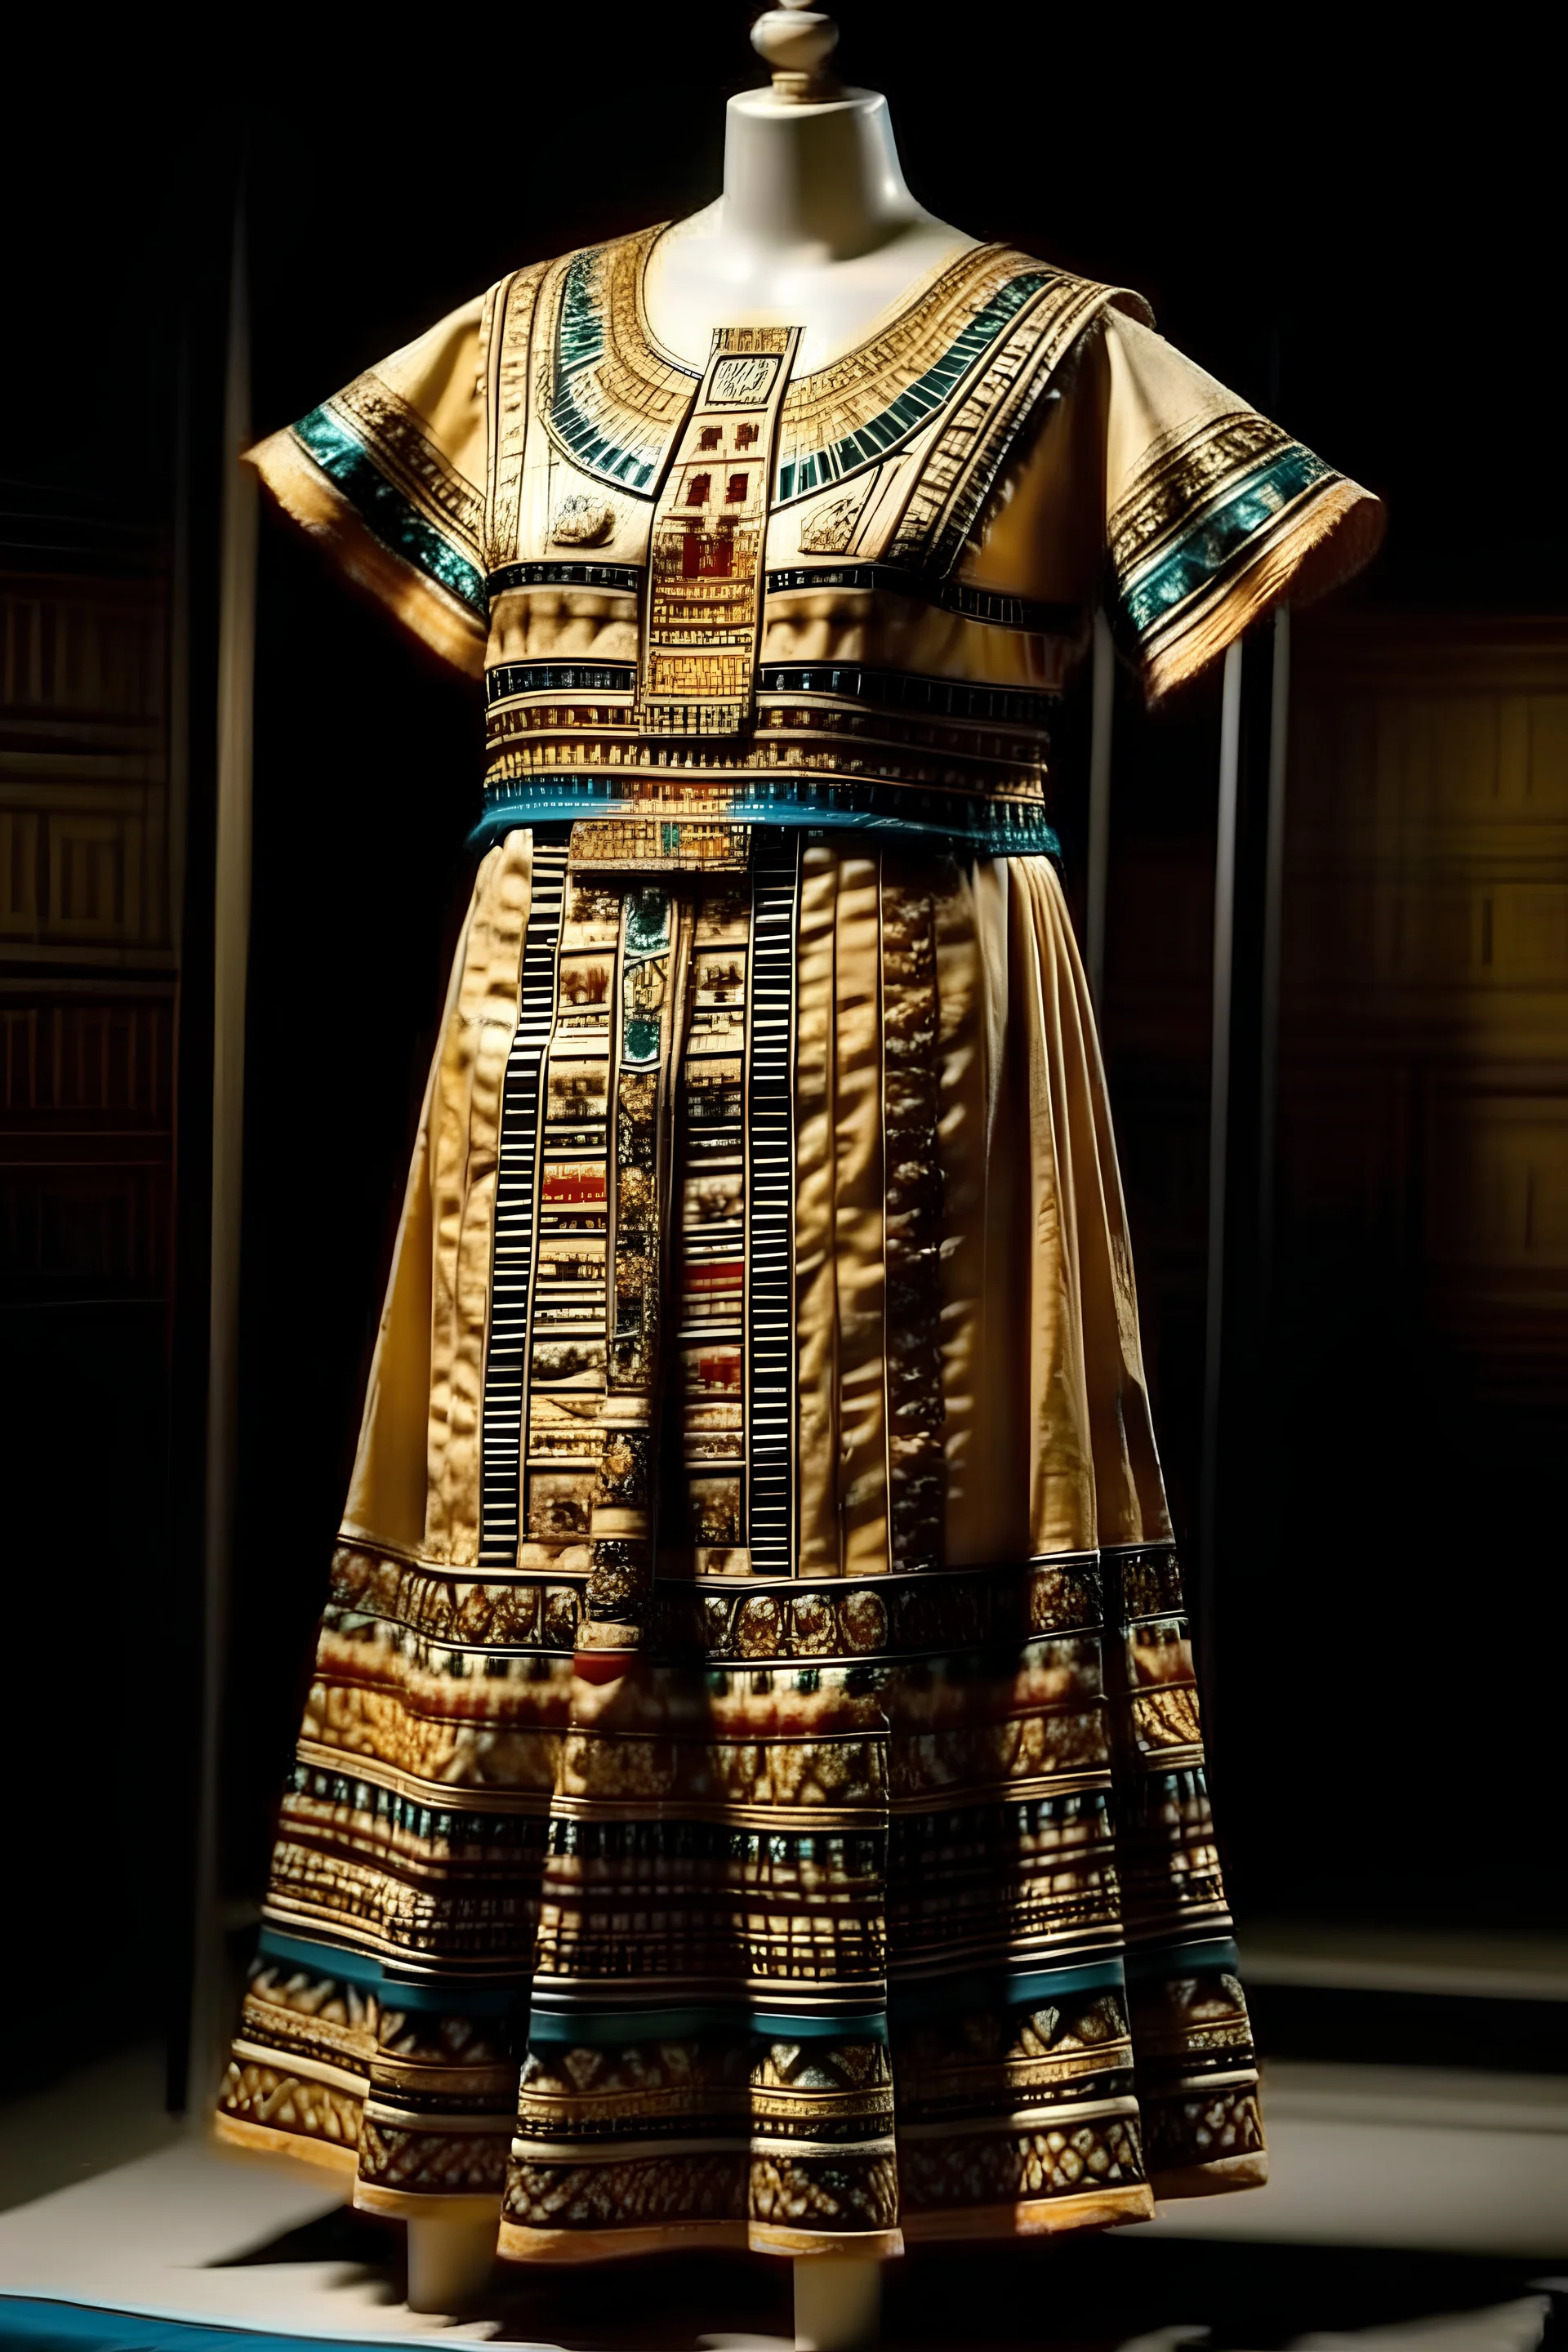 Egypt is home to the world's oldest known dress, which dates back to around 2800-2600 BC.